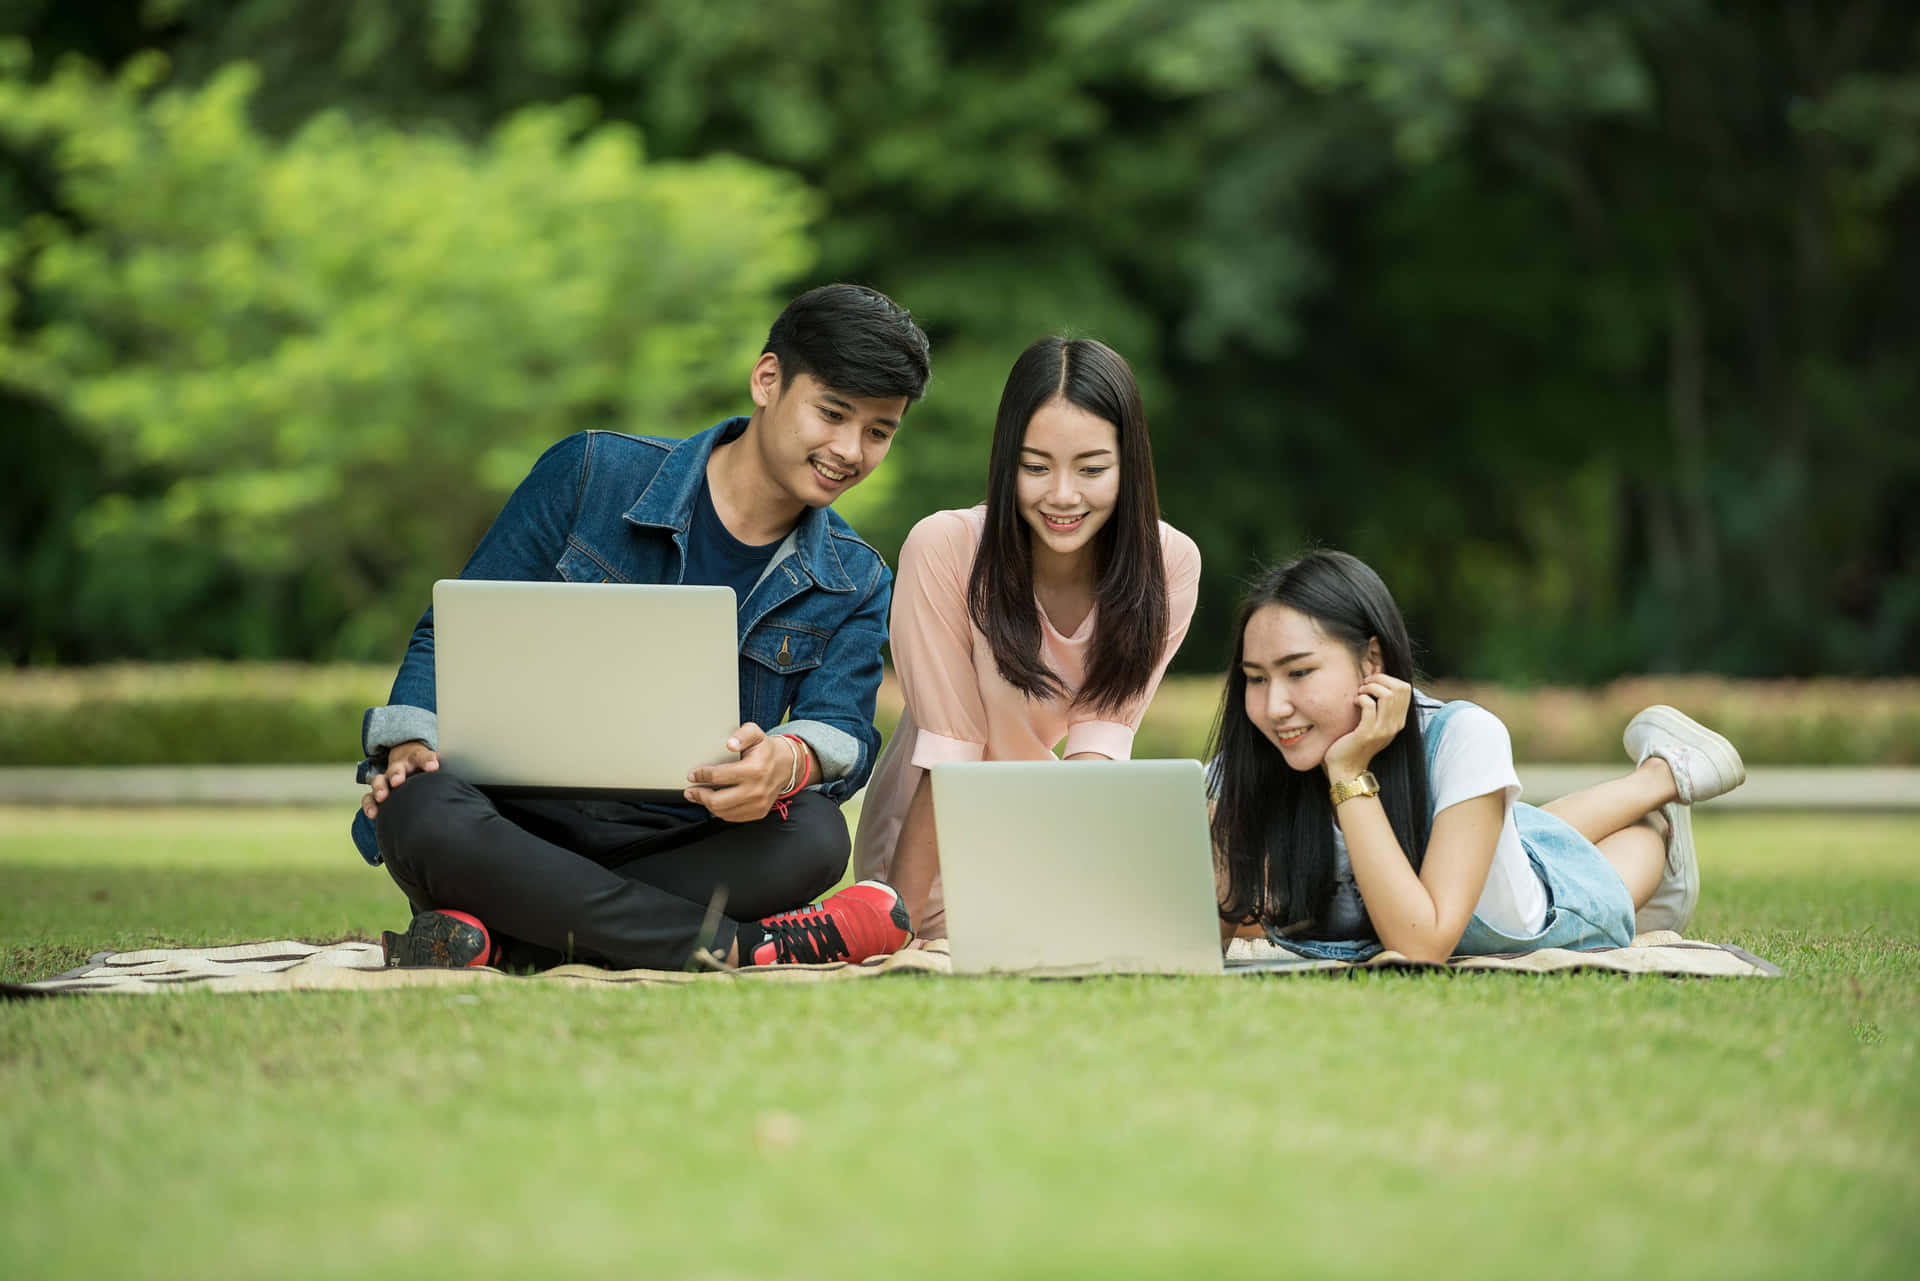 Students Studying Outdoors With Laptops.jpg